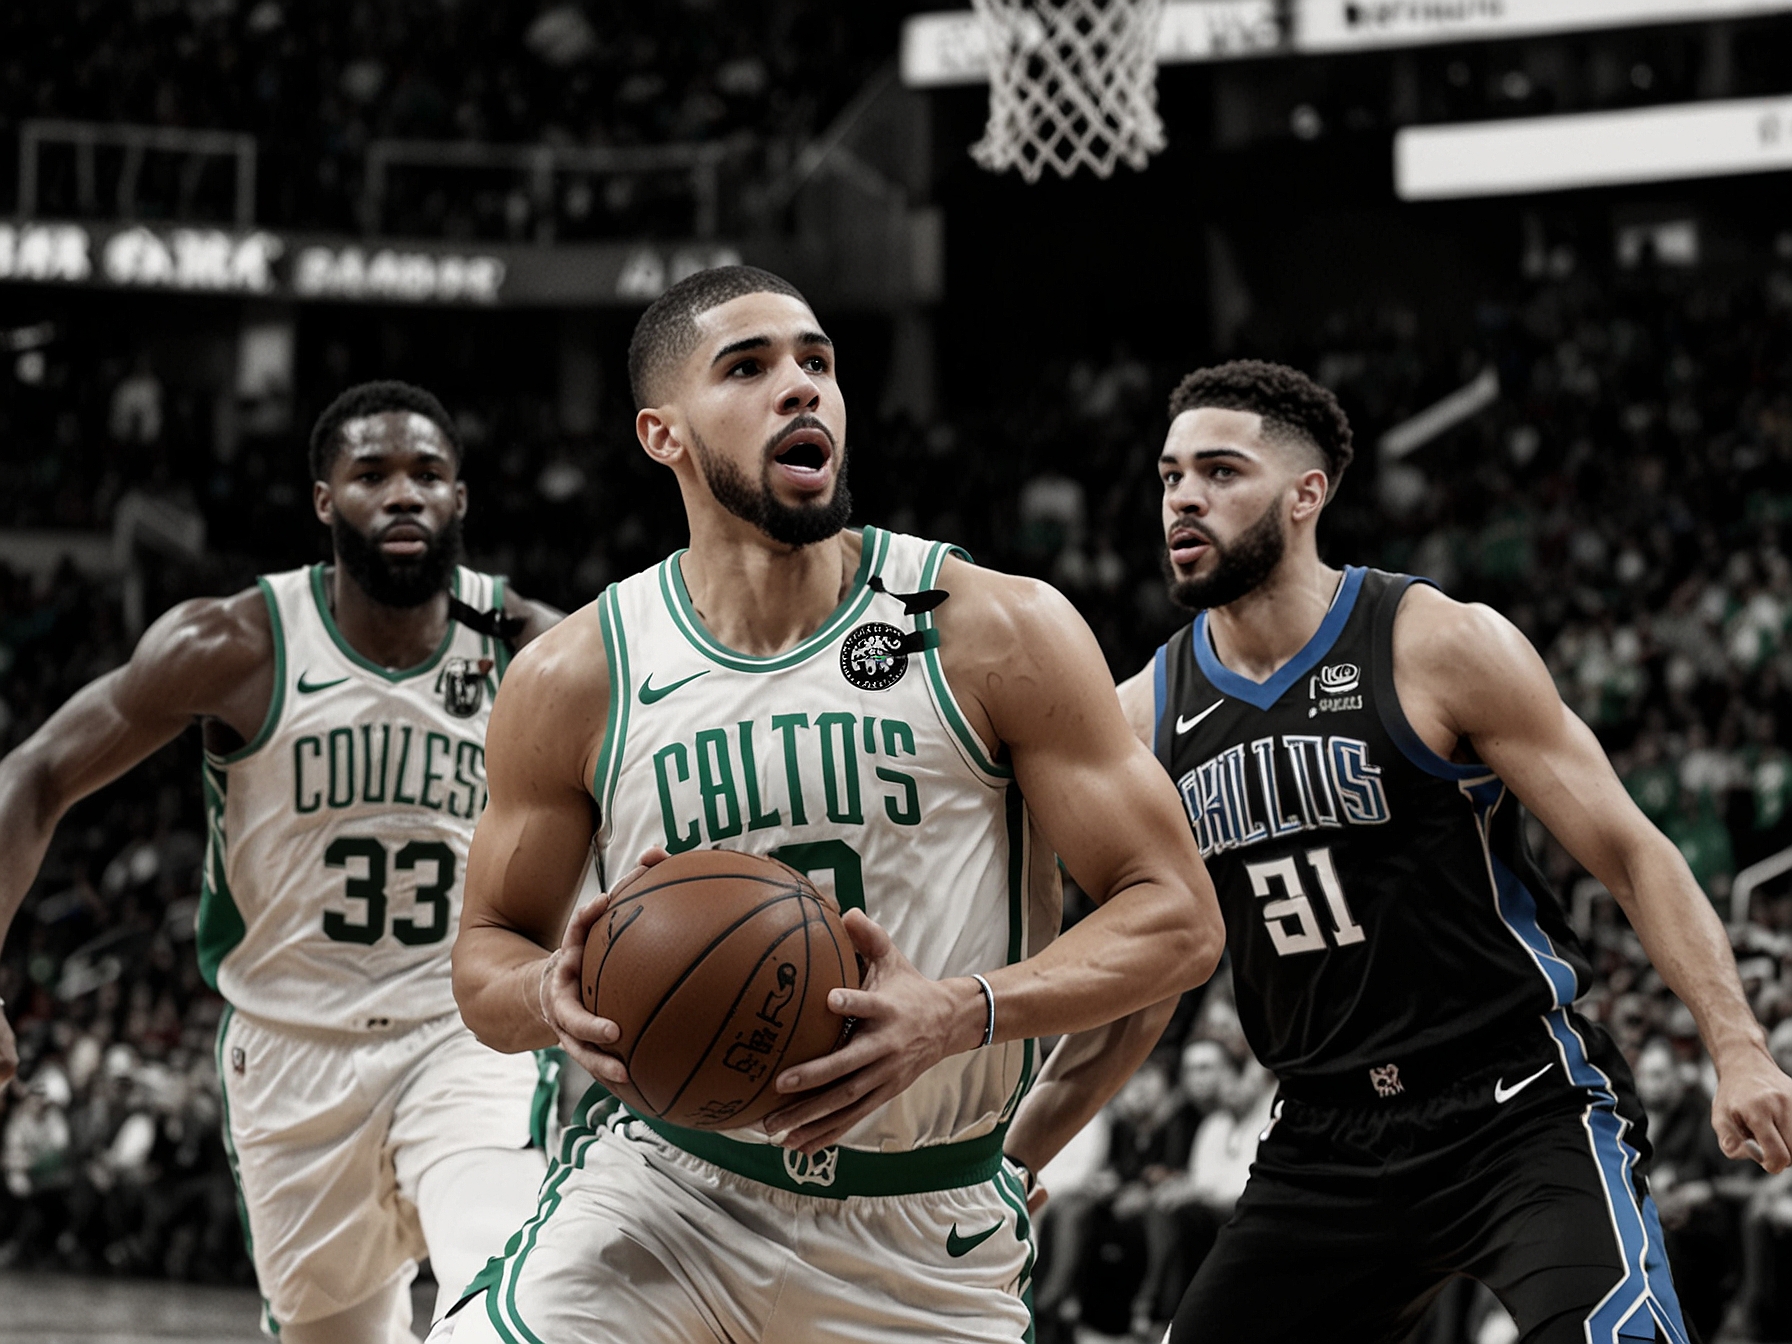 Jayson Tatum drives to the basket against Dallas Mavericks' defenders during Game 5 of the NBA Finals, showcasing his scoring prowess and relentless aggression on the court.